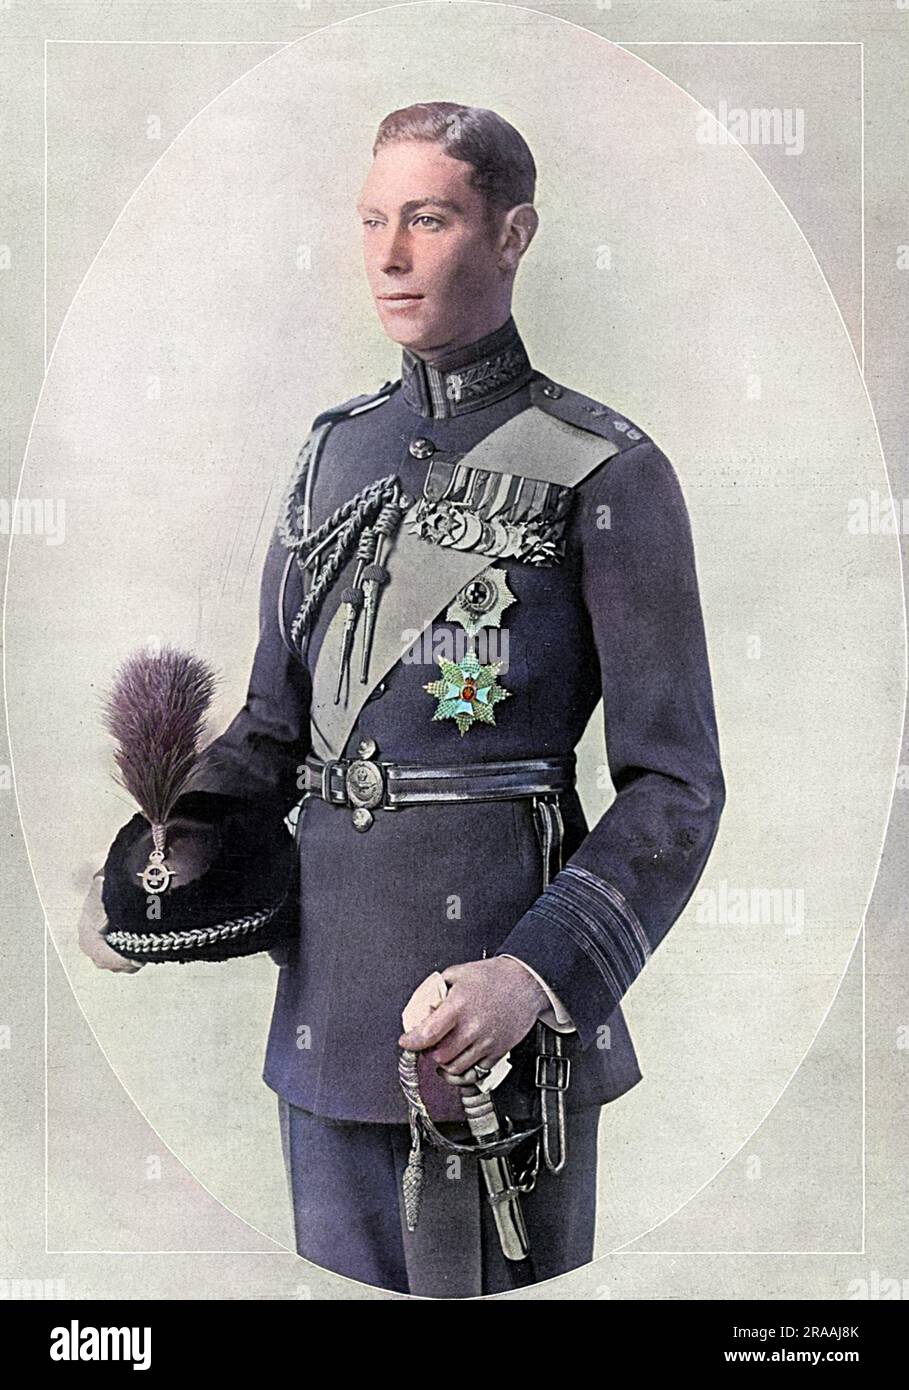 Prince Albert, Duke of York, later King George VI (1896-1952), pictured in the uniform of a Group Commander in the Royal Air Force, the uniform he chose for his wedding to Lady Elizabeth Bowes-Lyon in April 1923.     Date: 1923 Stock Photo